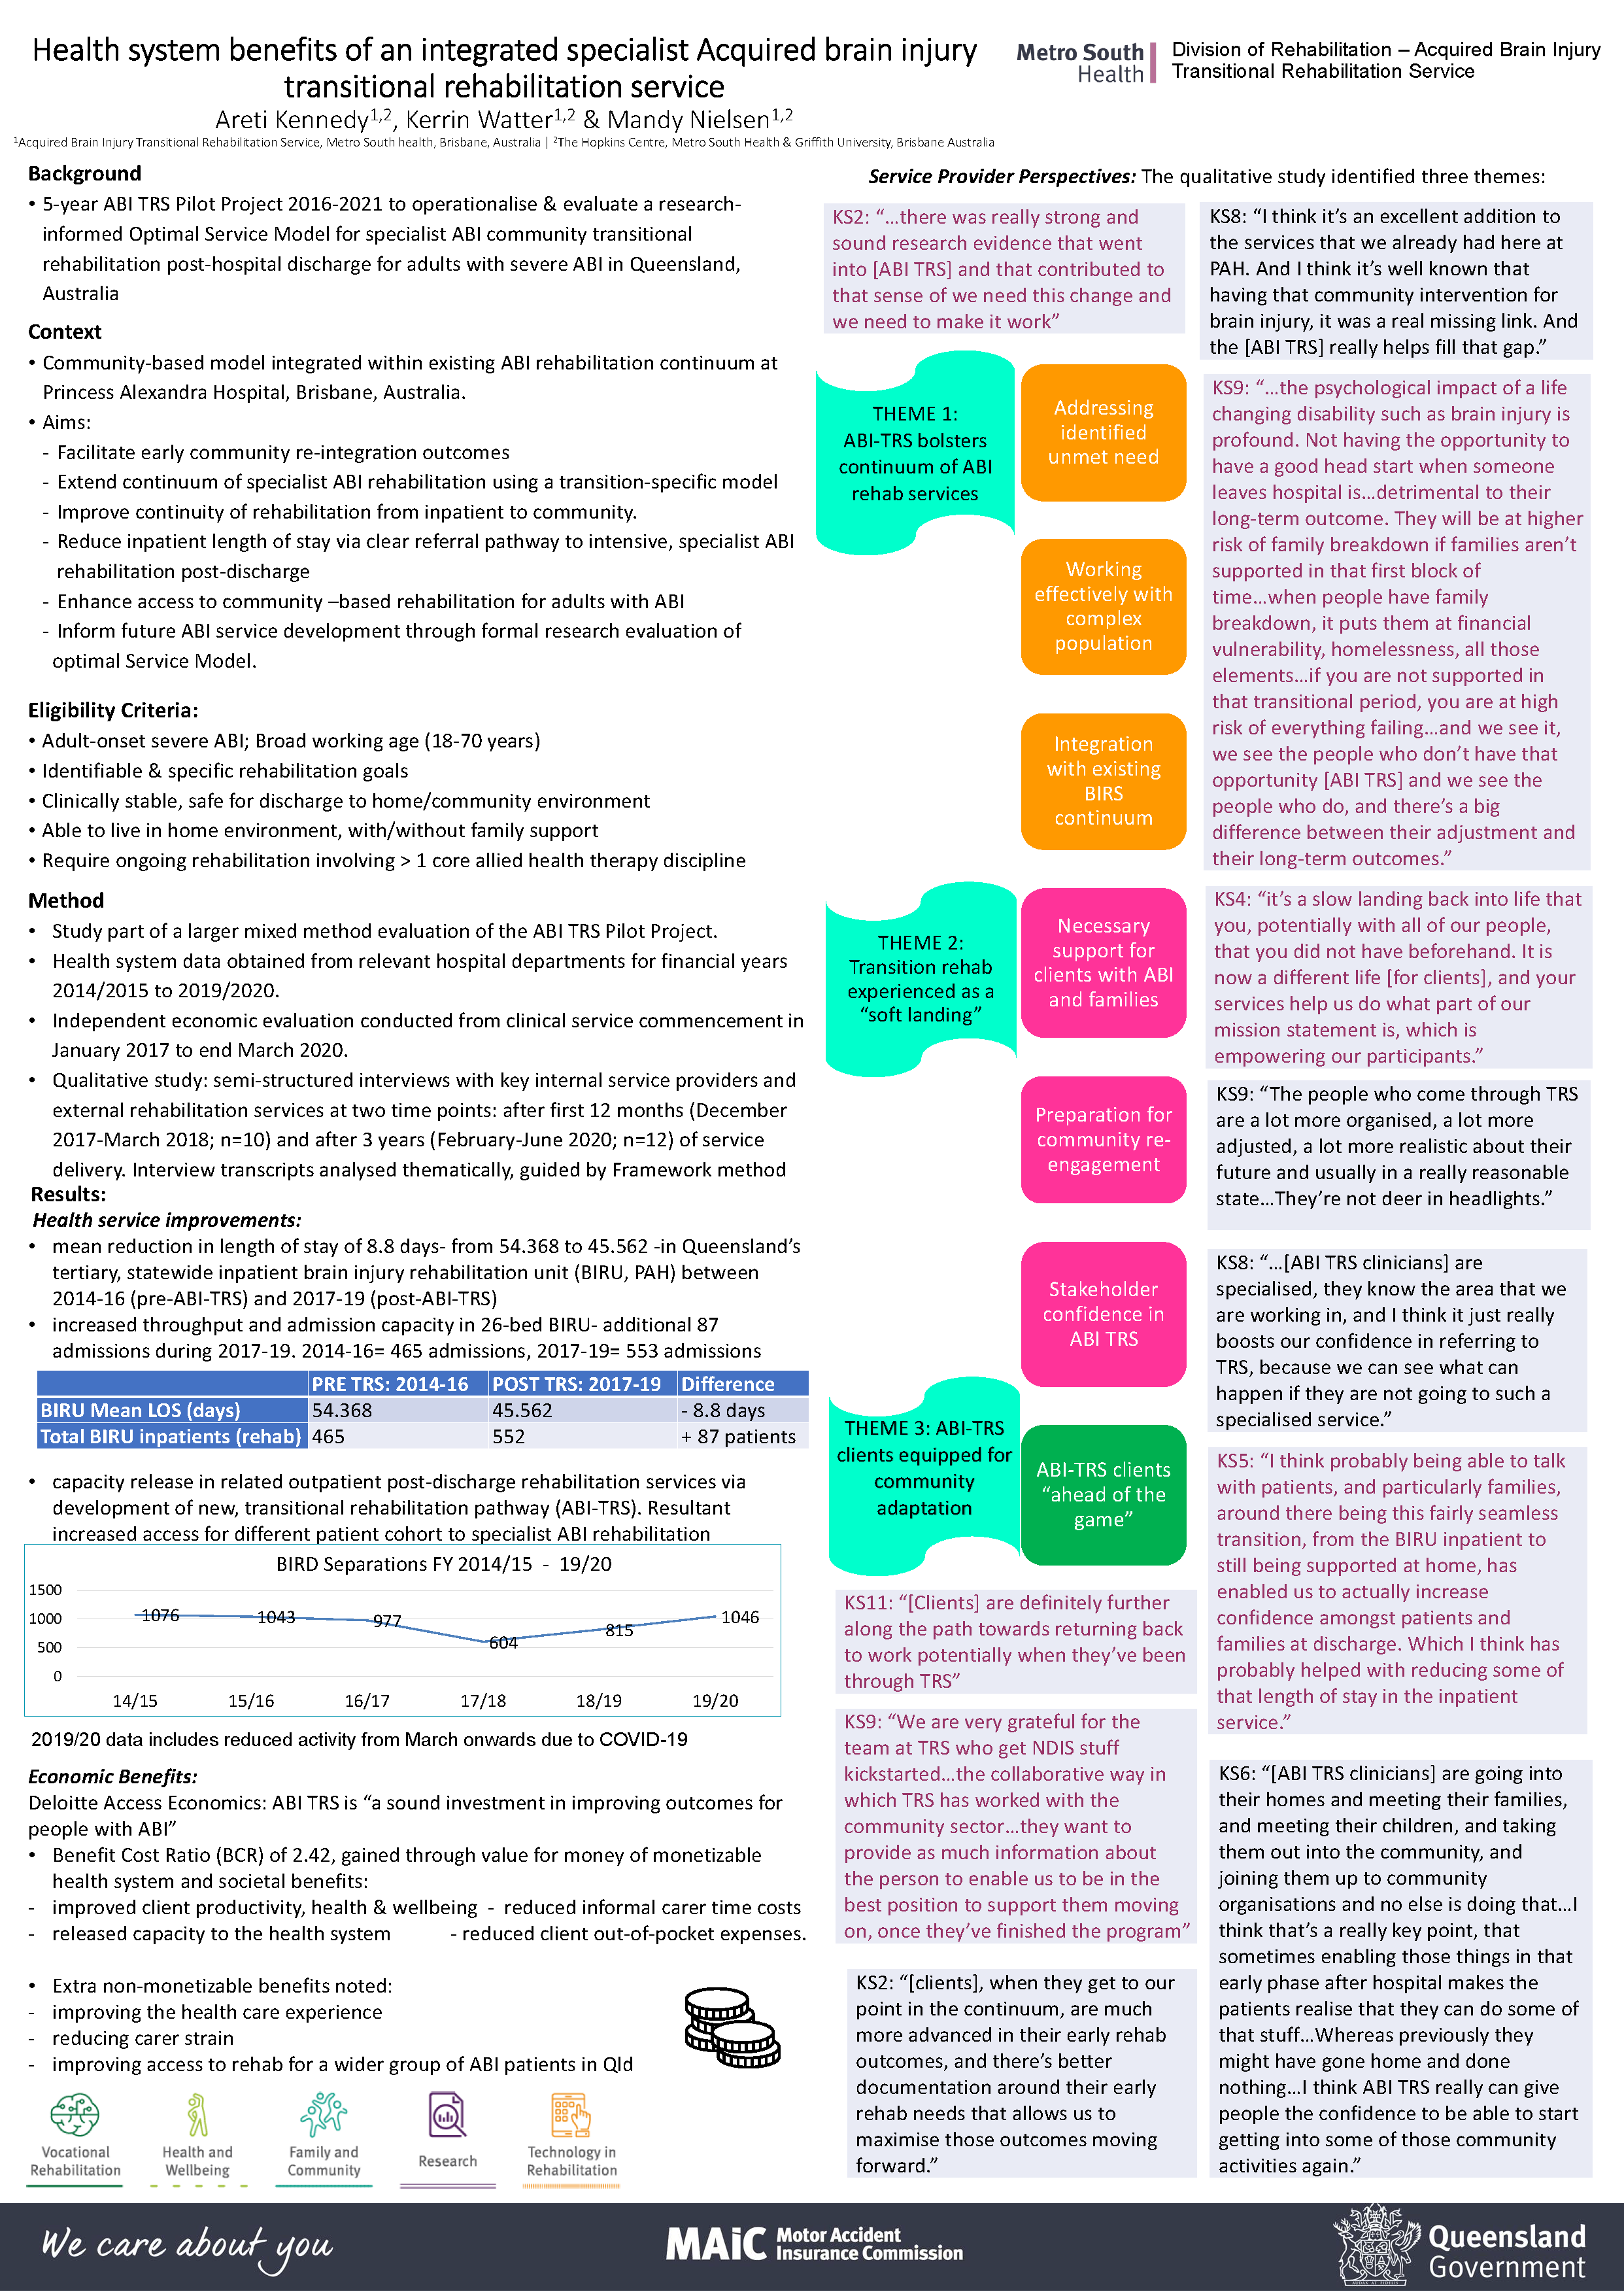 Poster: "Health system benefits of an integrated specialist Acquired brain injury transitional rehabilitation service”